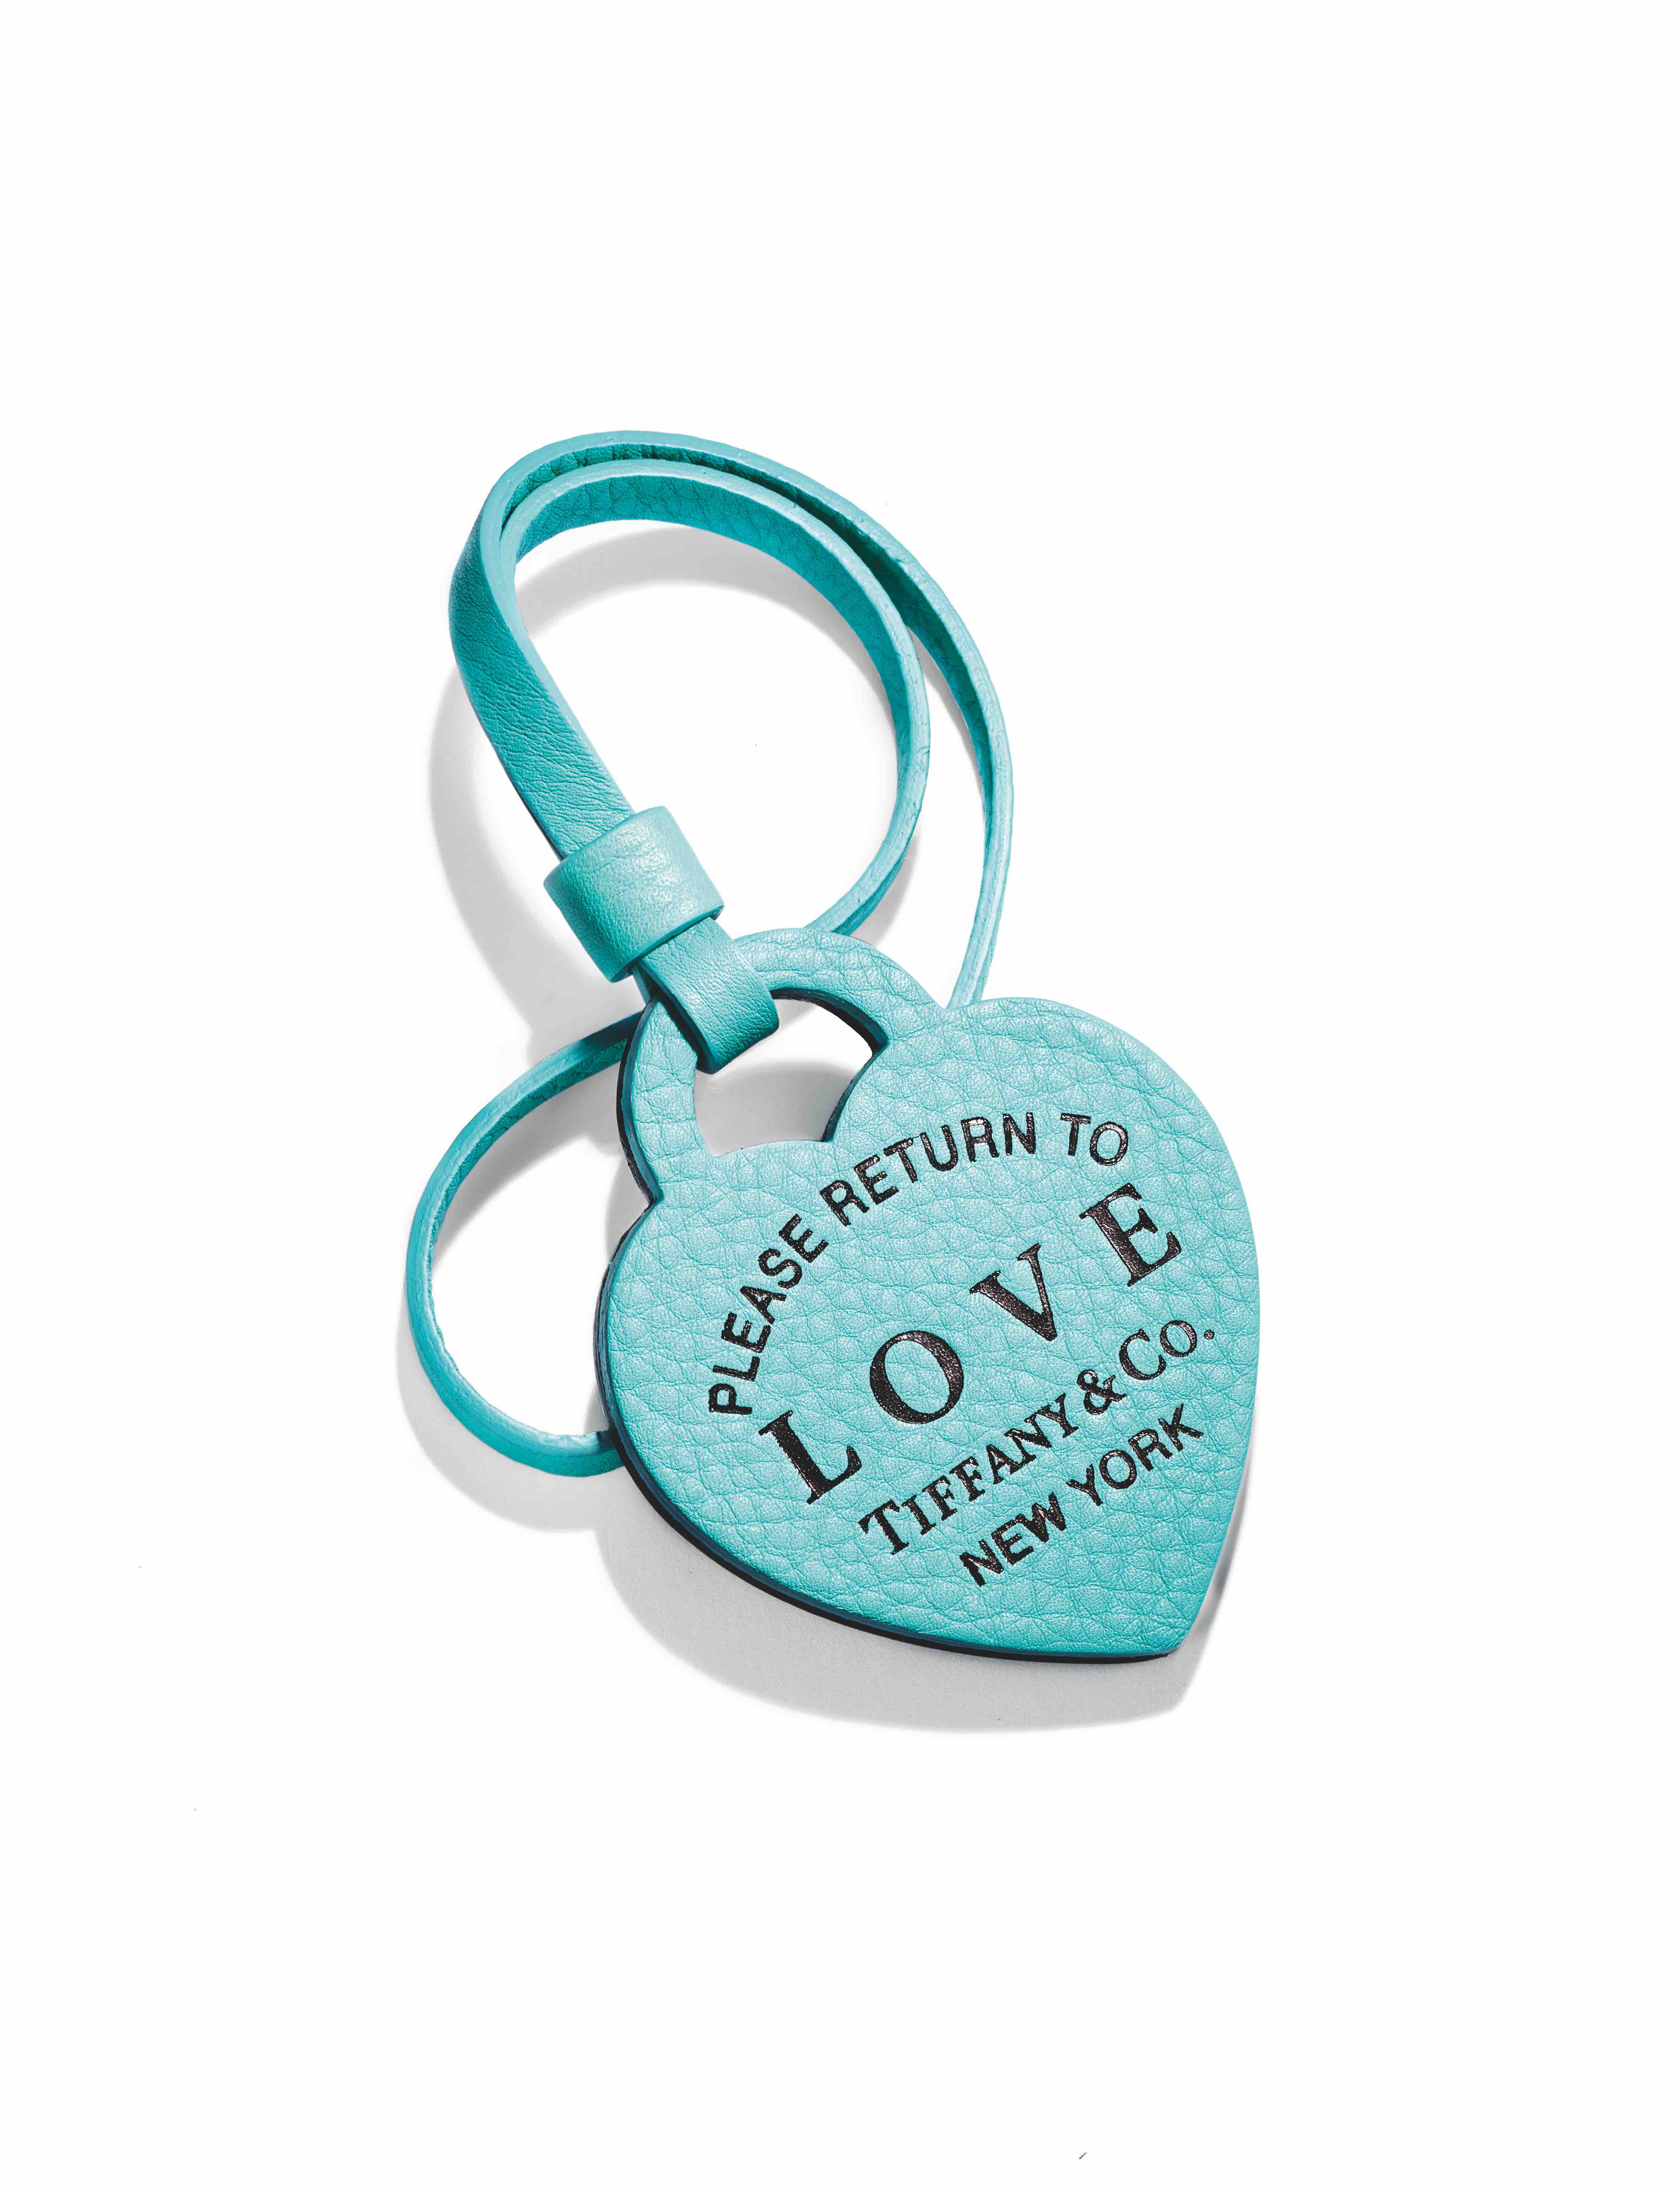 5 reasons to fall in love with these latest lovelies from Tiffany & Co